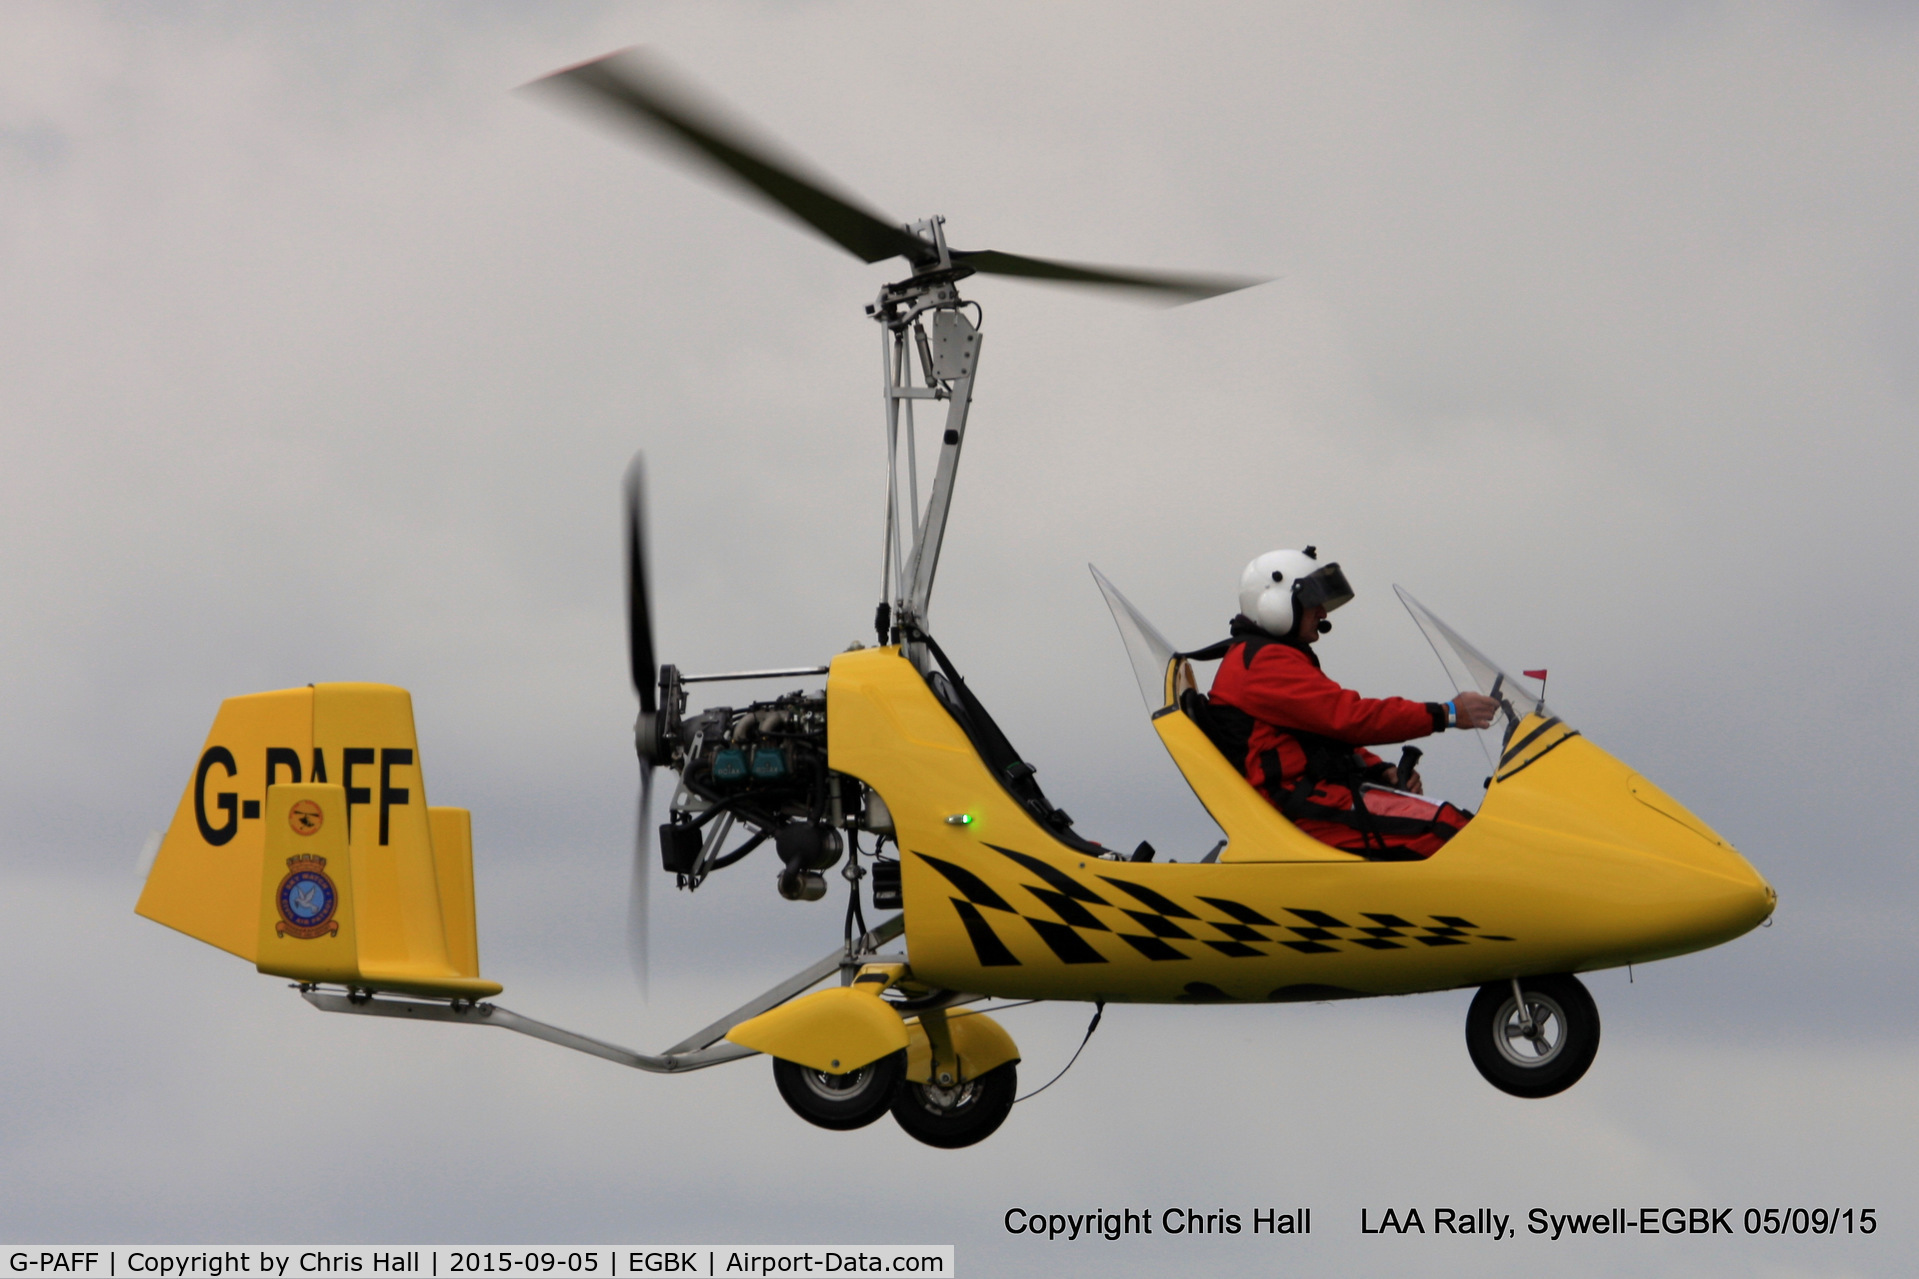 G-PAFF, 2011 Rotorsport UK MTOsport C/N RSUK/MTOS/039, at the LAA Rally 2015, Sywell